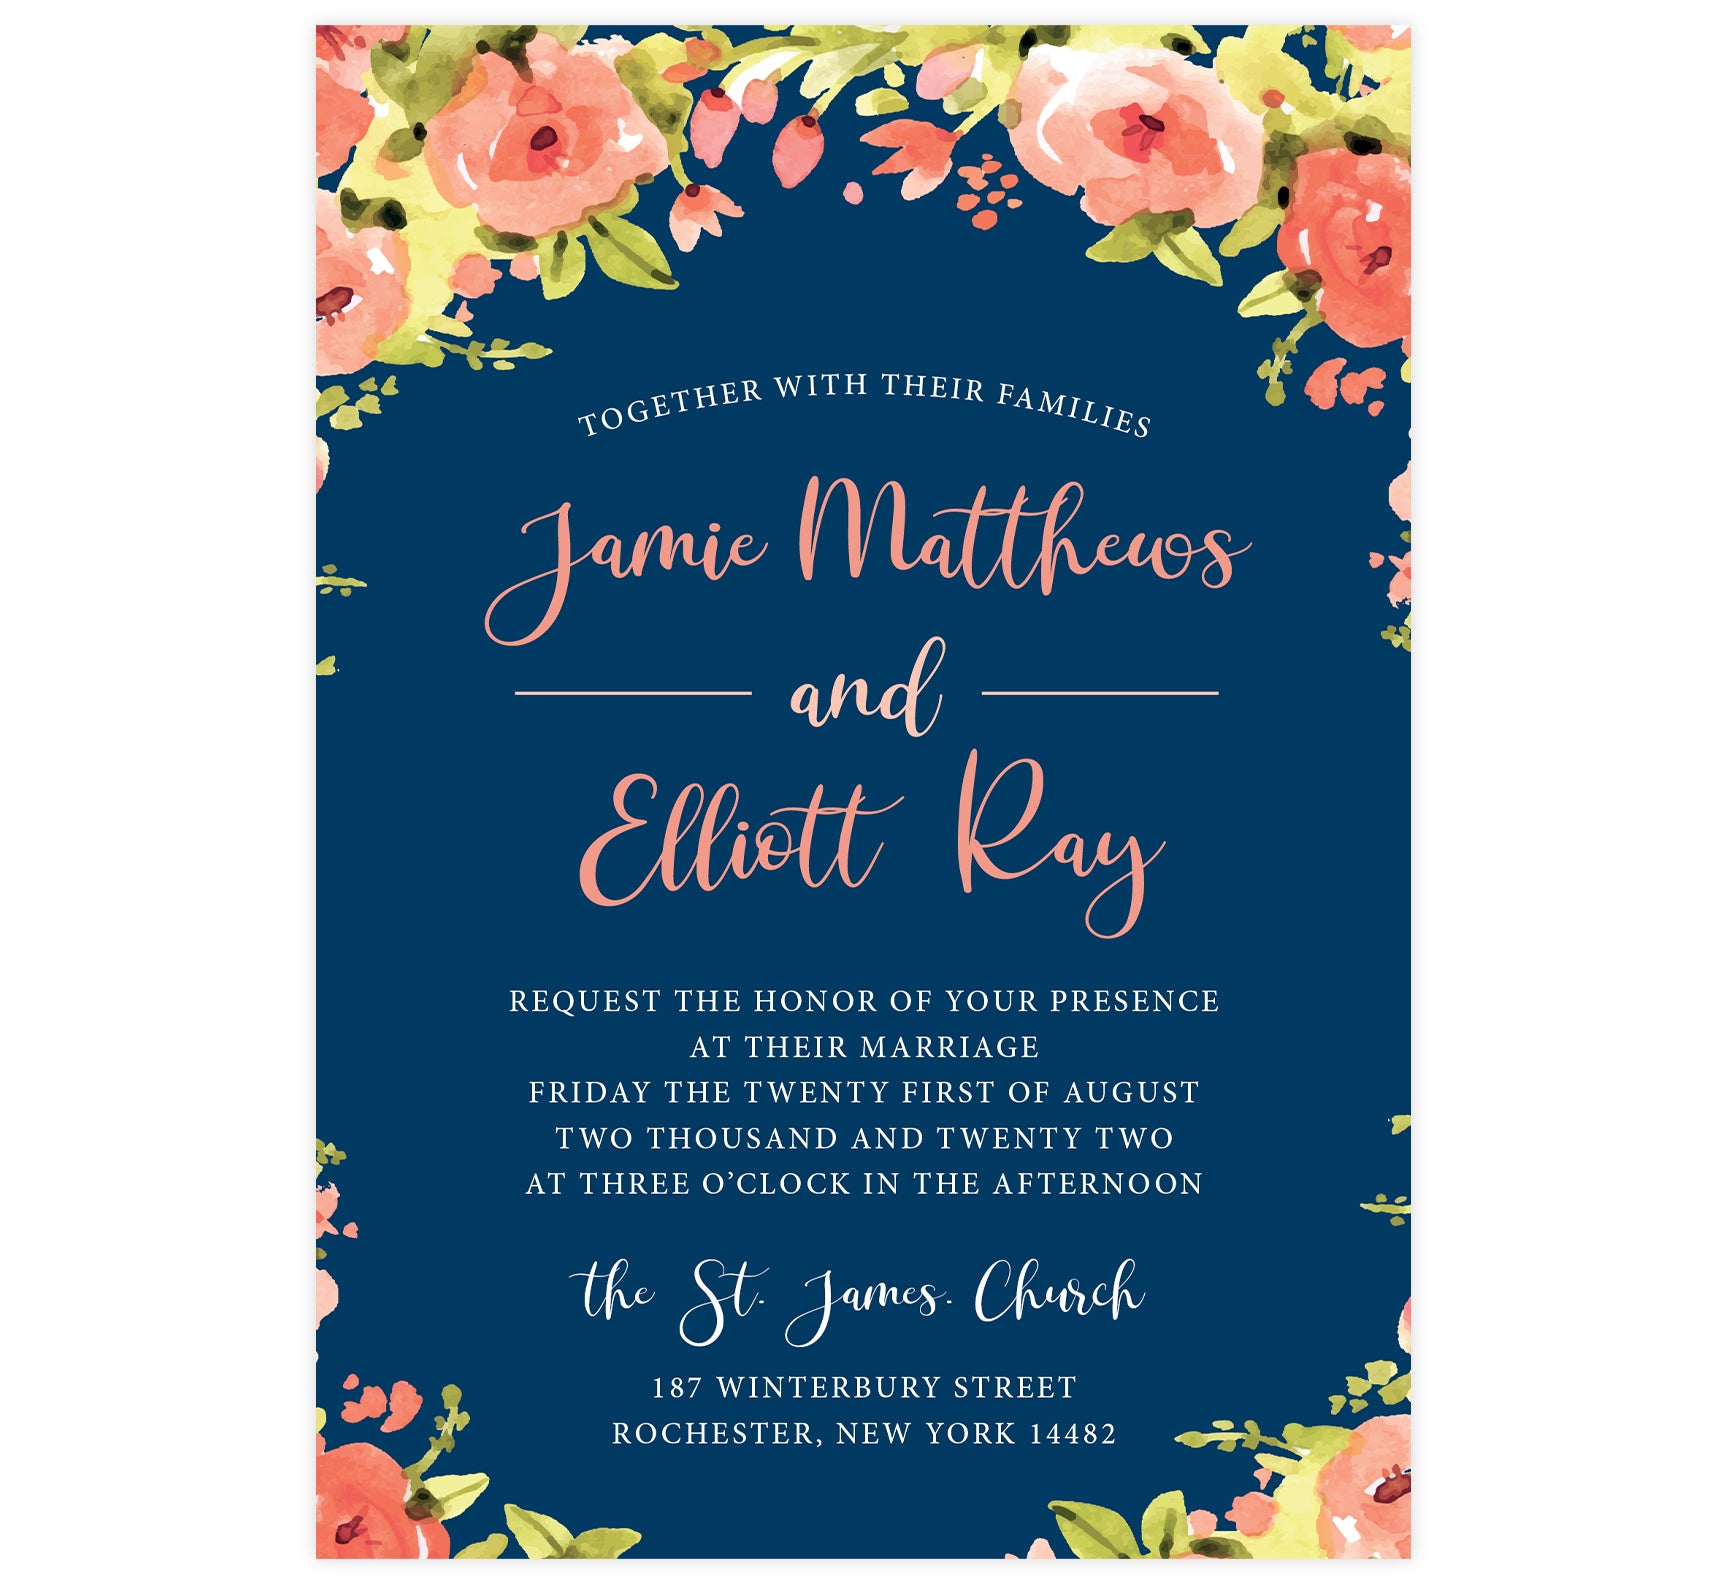 Blushing Rose Wedding Invitation, navy background with pink florals and pink and white text